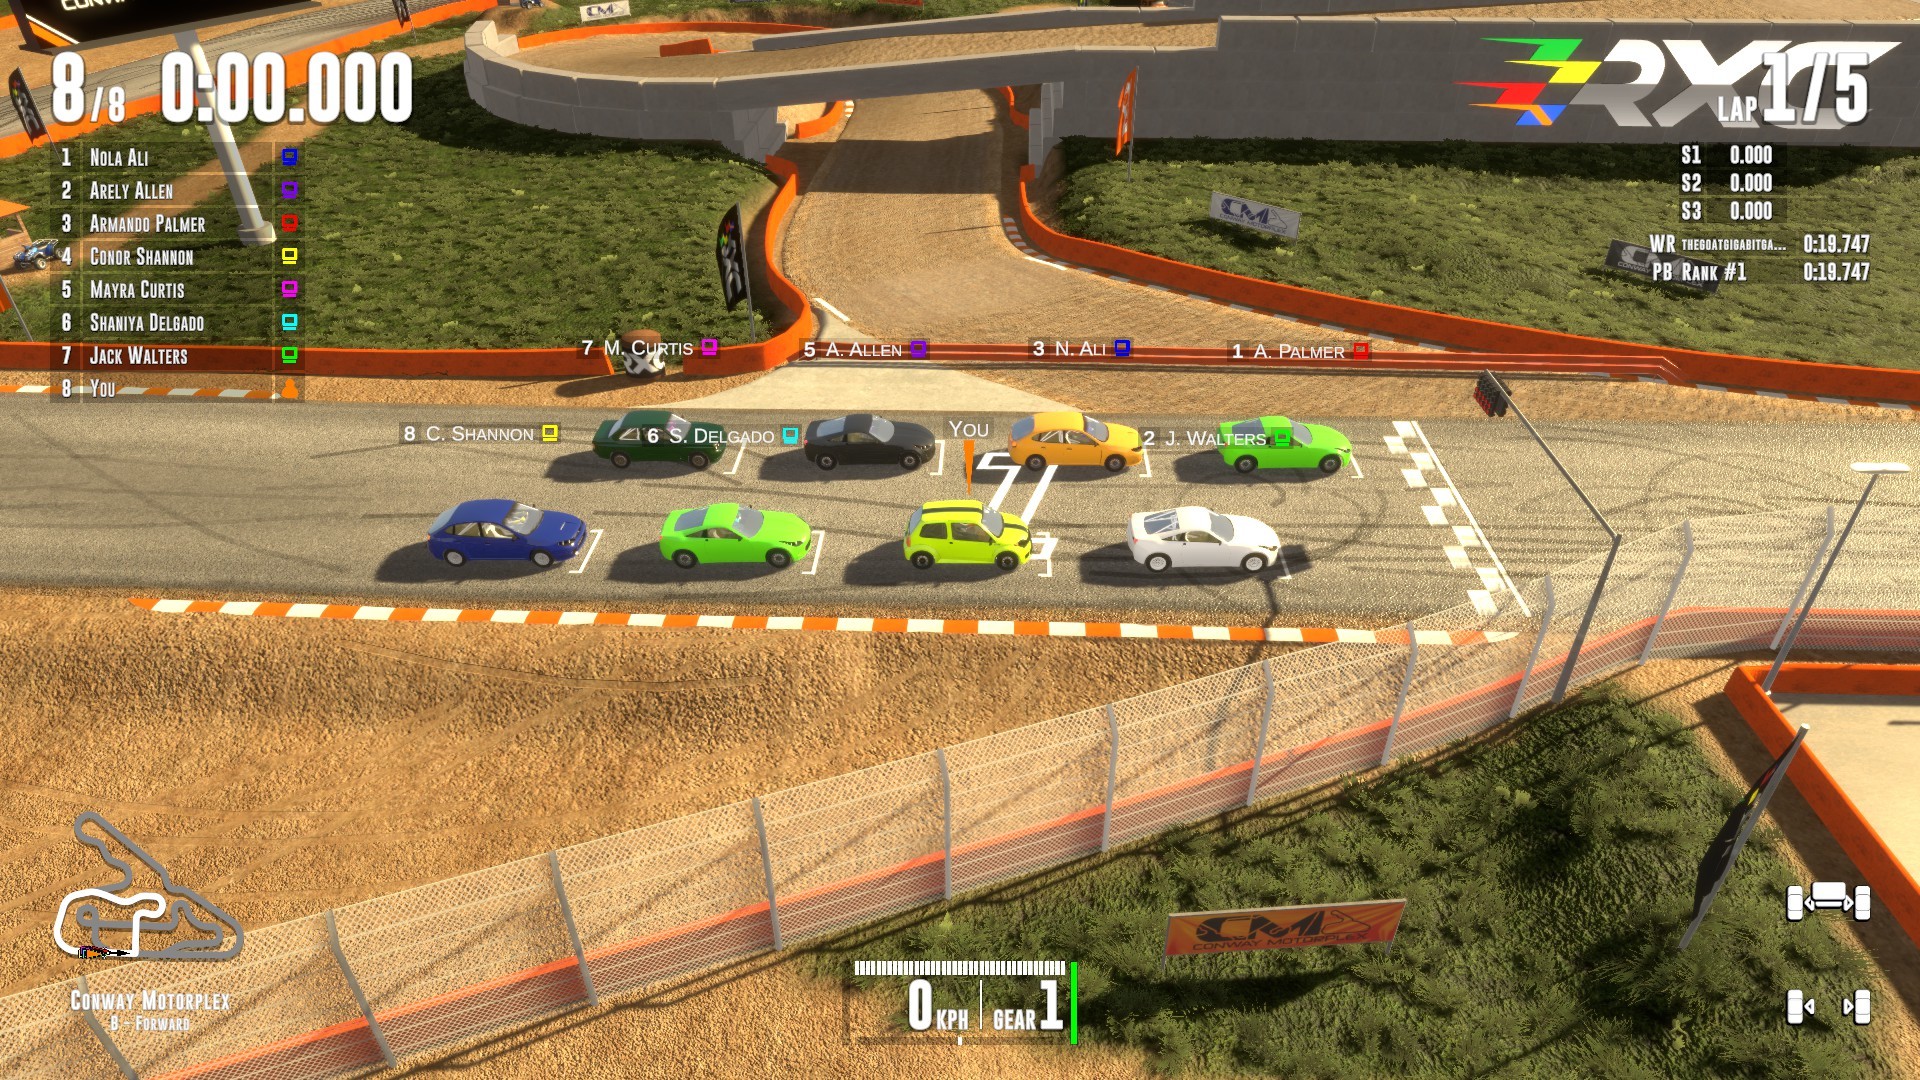 RXC - Rally Cross Challenge Free Download